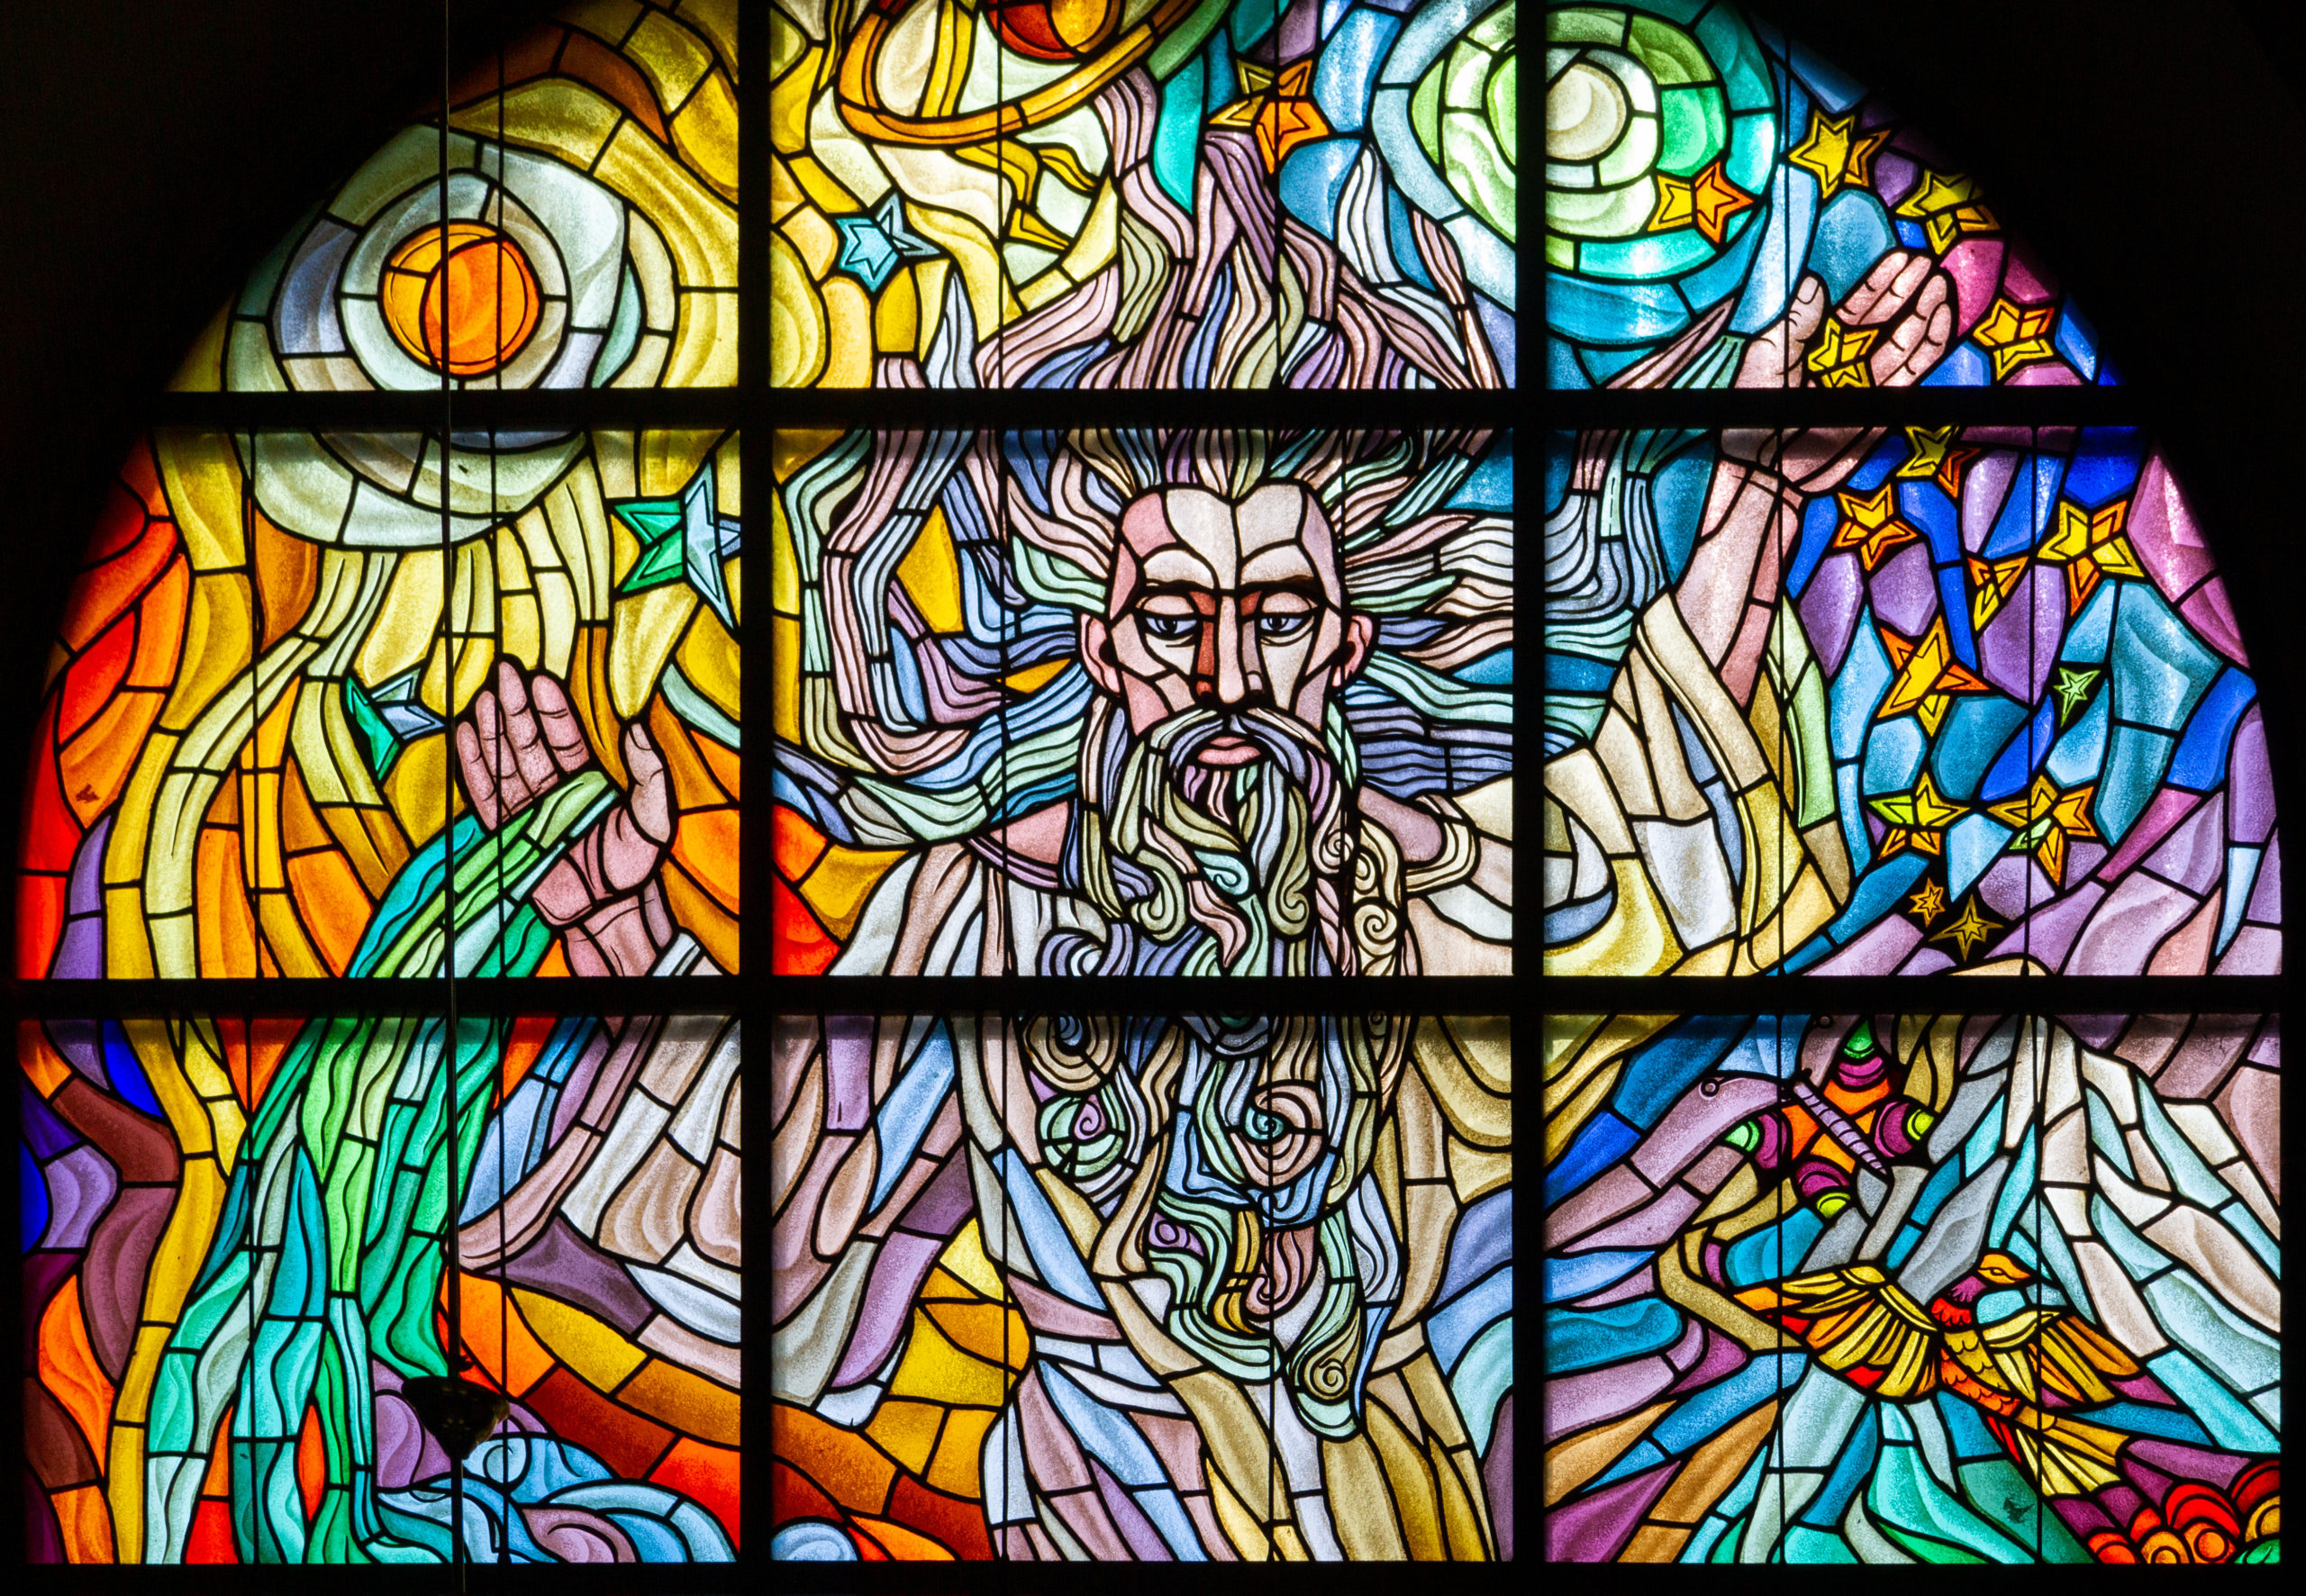 Zegiestow, Poland. 2019/8/10. Stained-glass window depicting the Creation of the World with the words "And God said, Let us make..." Roman Catholic Church of Saint Anne.